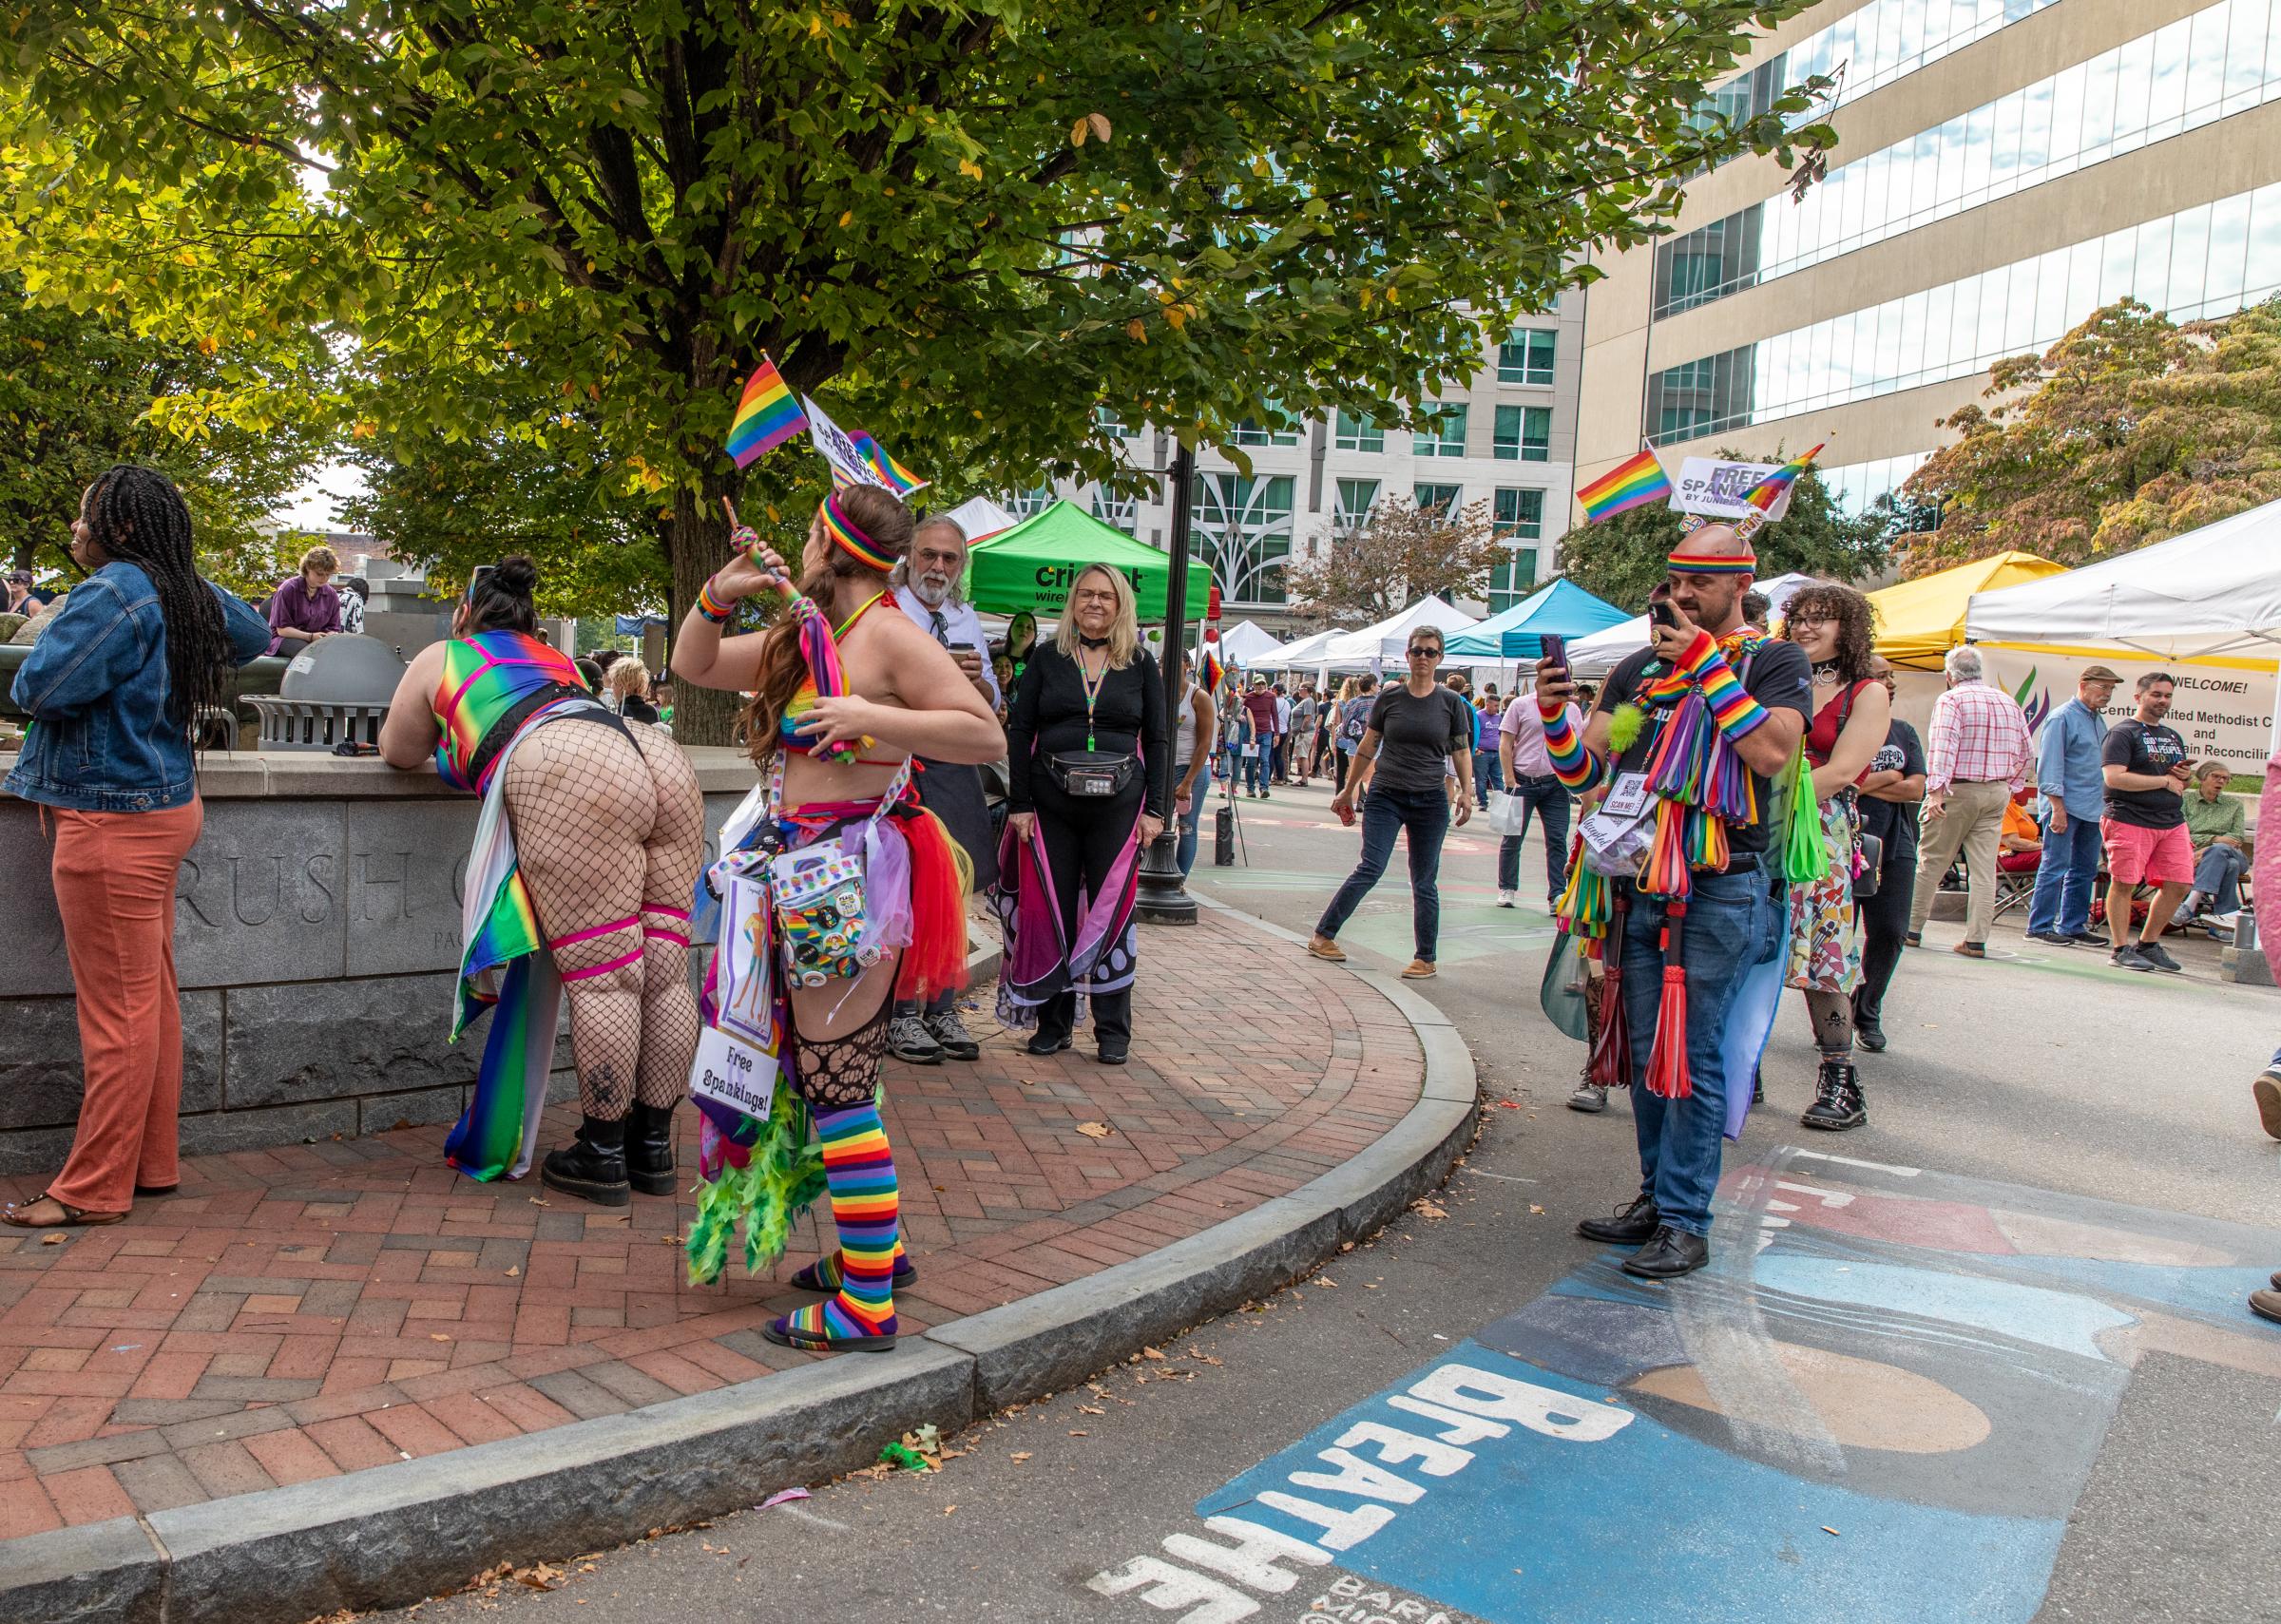 Blue Ridge Pride Festival 2022 - The festival included performance artists like these two offering free spankings.